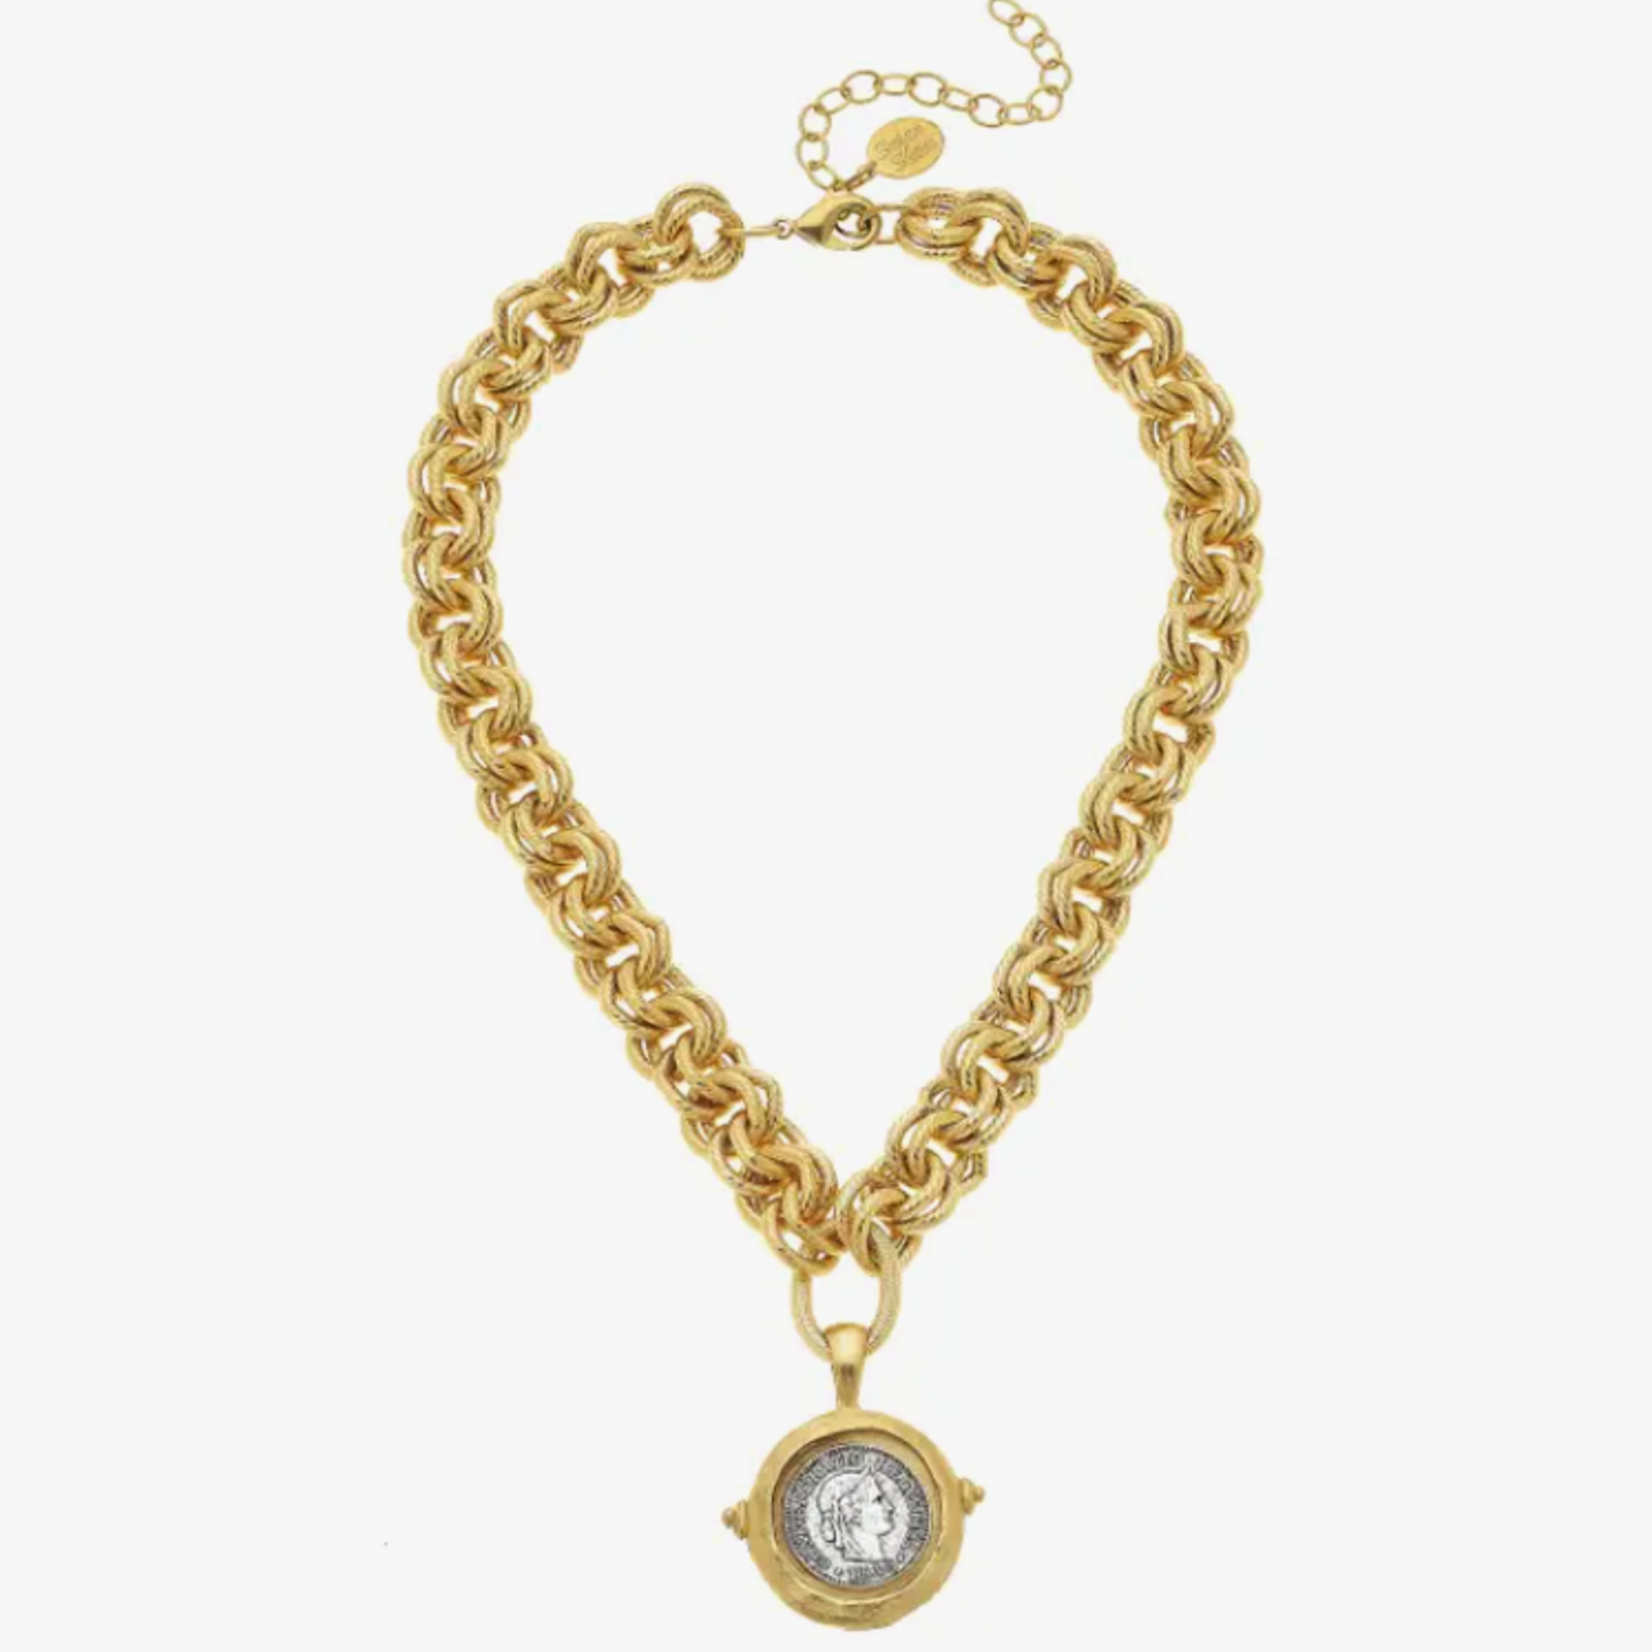 susan shaw Gold and Silver Italian Intaglio Coin Necklace